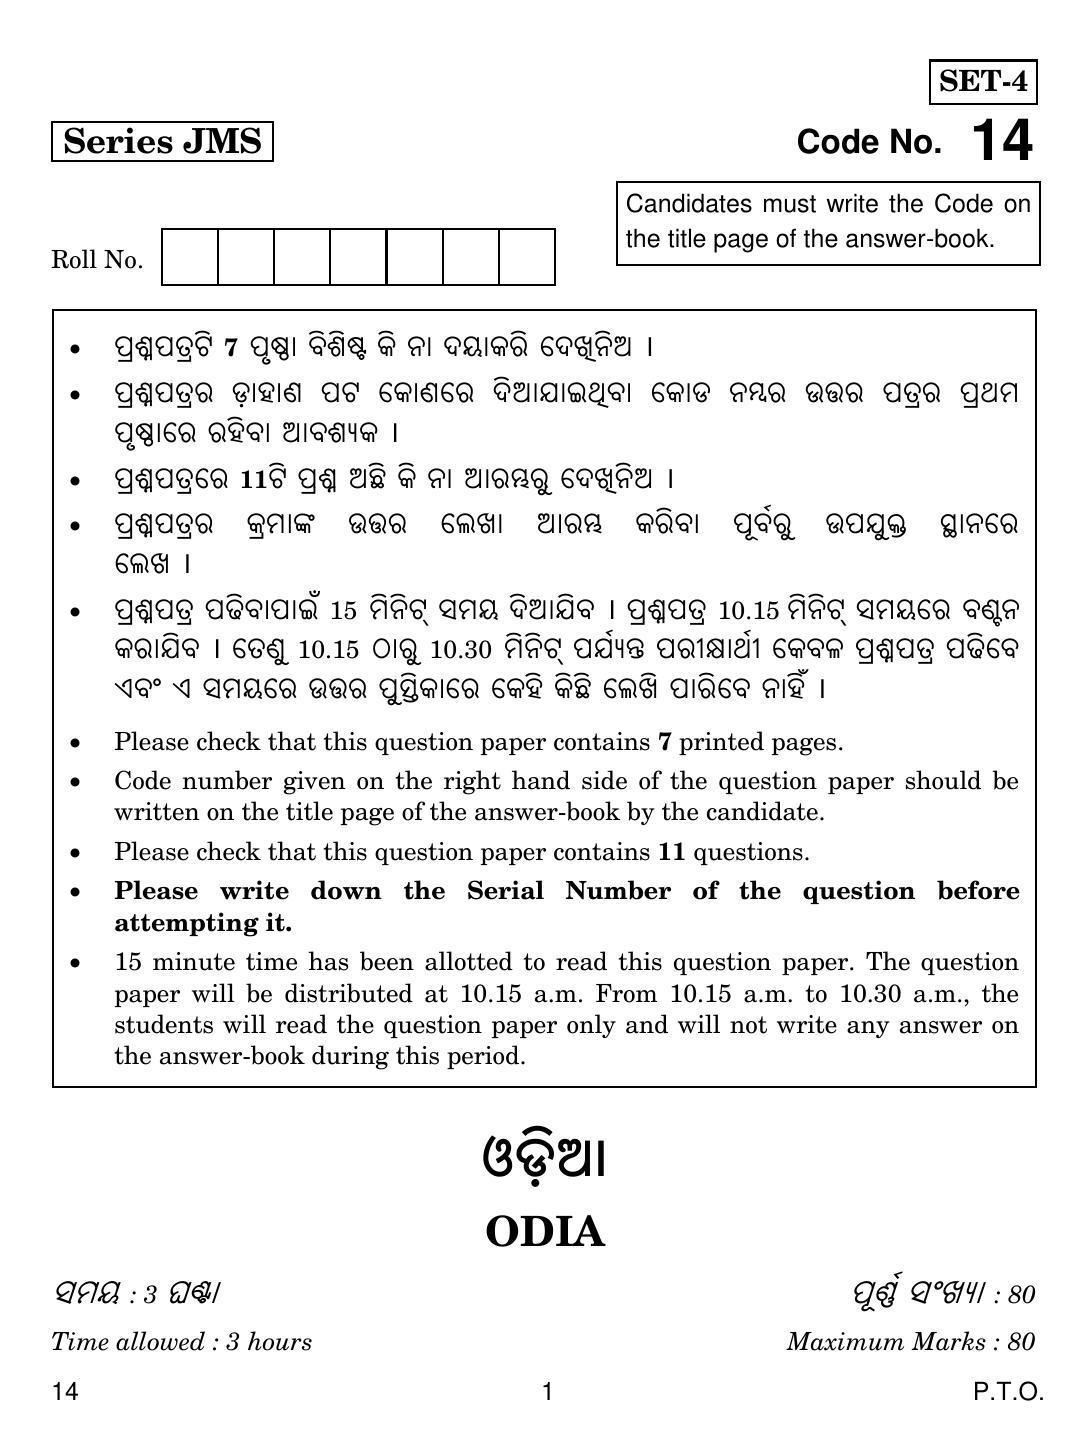 CBSE Class 10 14 Odia 2019 Question Paper - Page 1